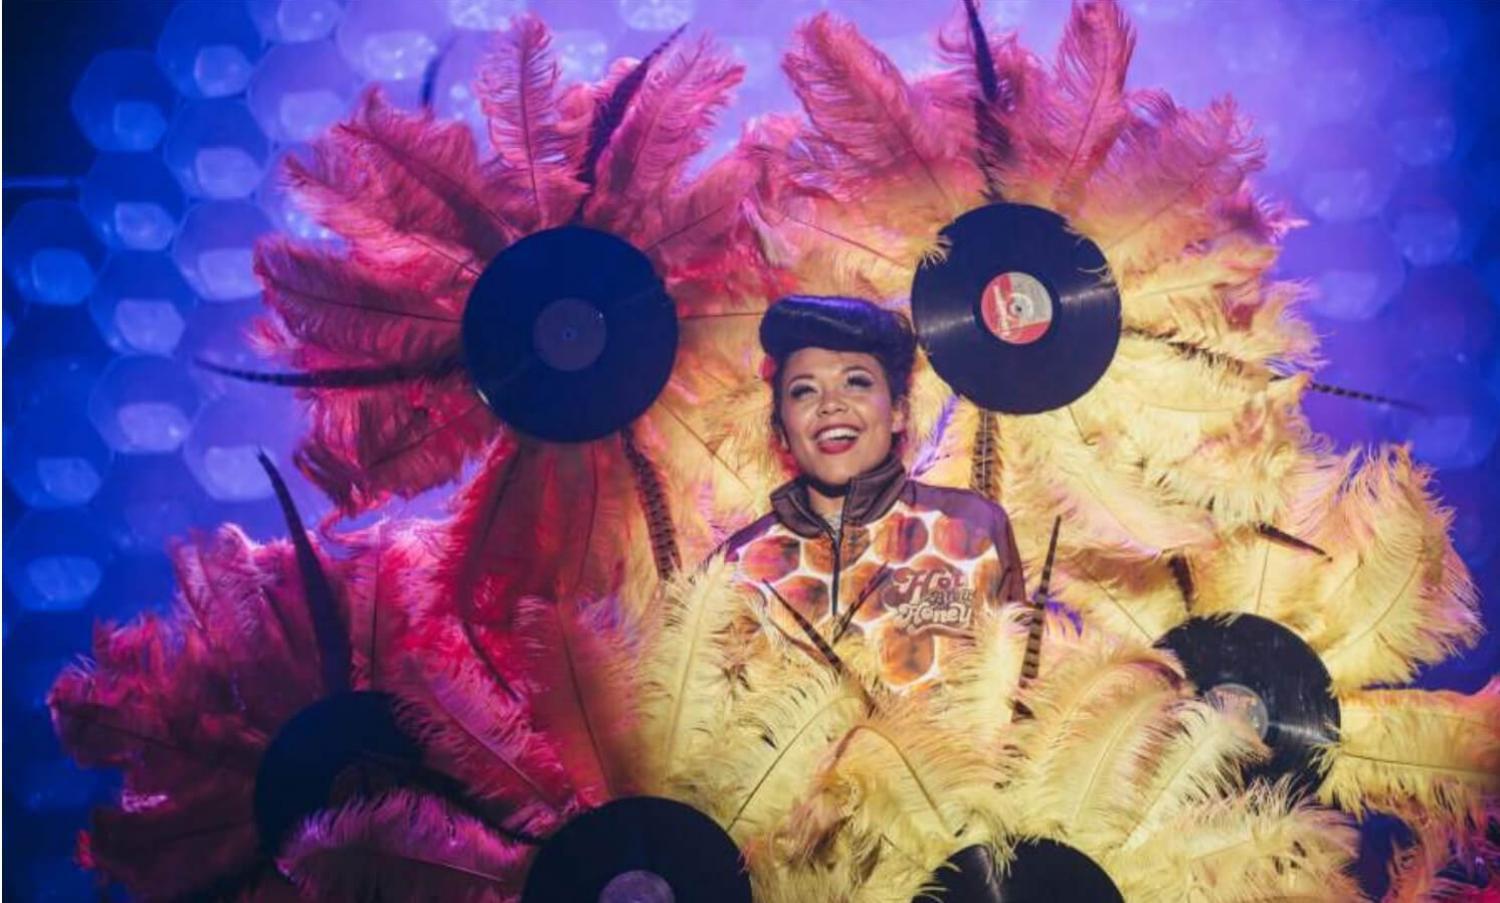 Hot Brown Honey on stage at a Fringe venue surrounded by large feathers and records made to look like flowers. Image by: David Monteith Hodge